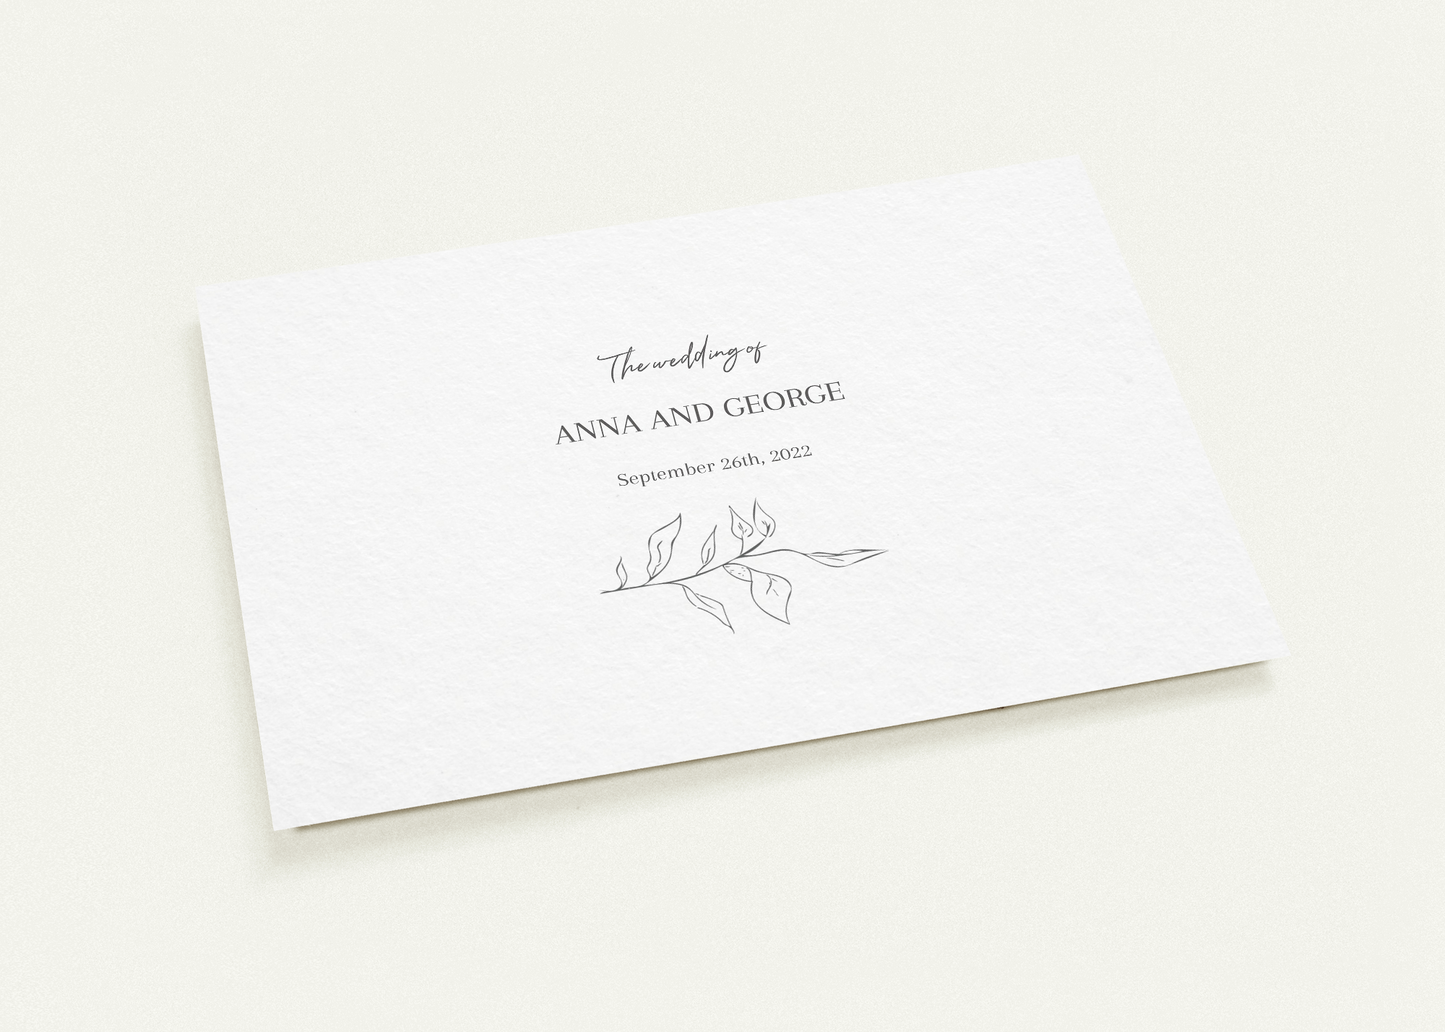 Decorative Branch Wedding invitations (sold as packs of 10 cards, flat, with white envelopes)